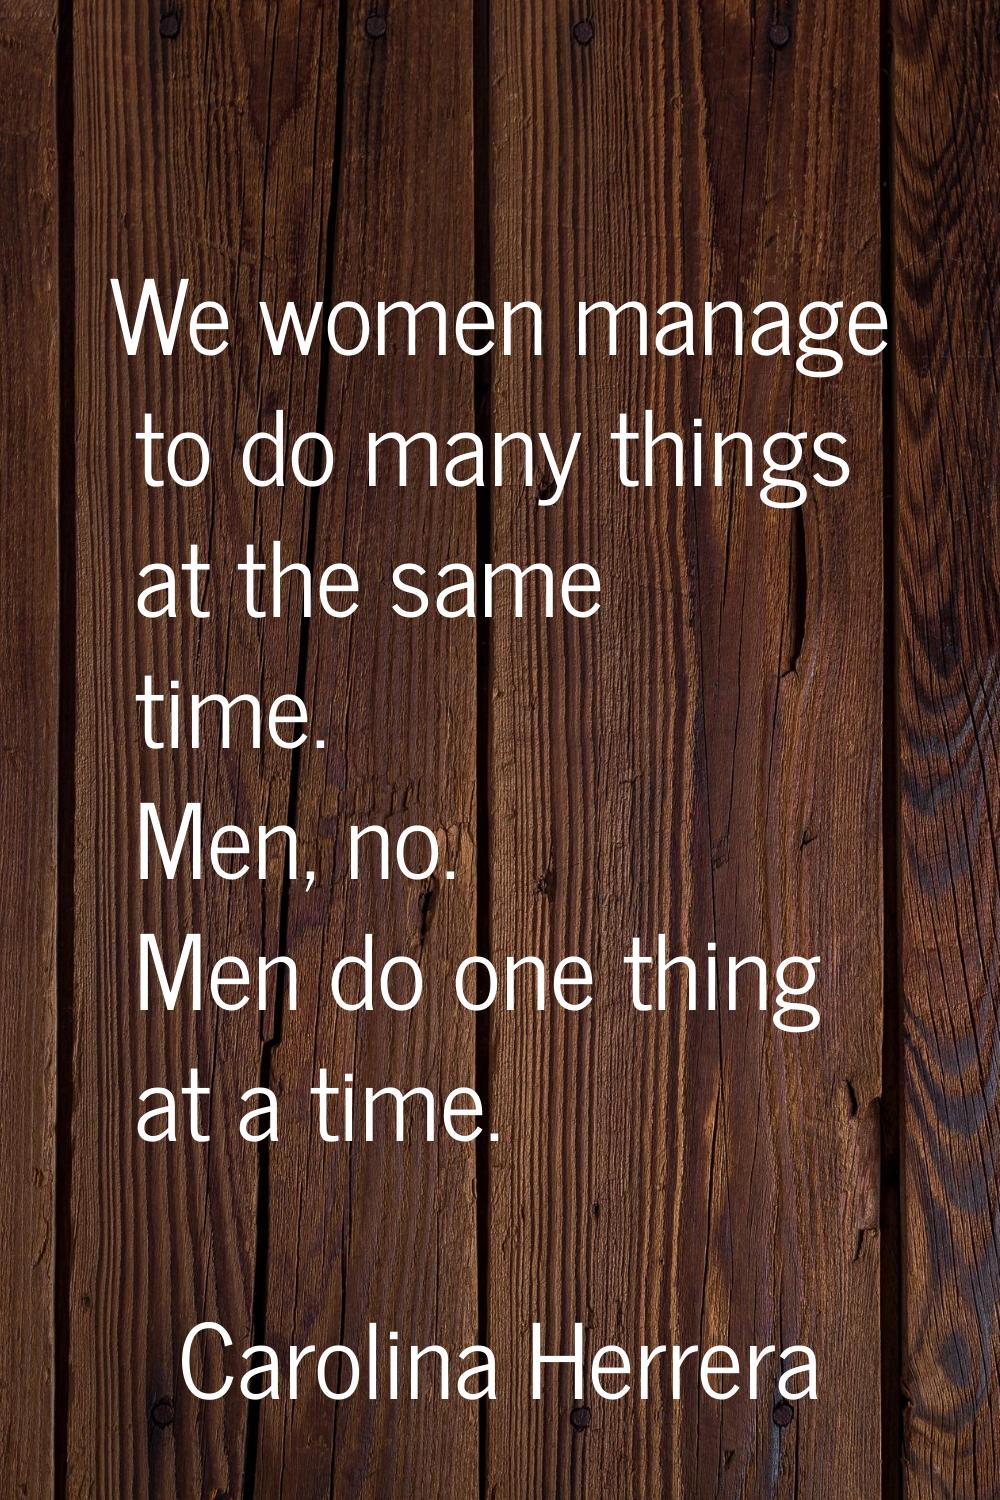 We women manage to do many things at the same time. Men, no. Men do one thing at a time.